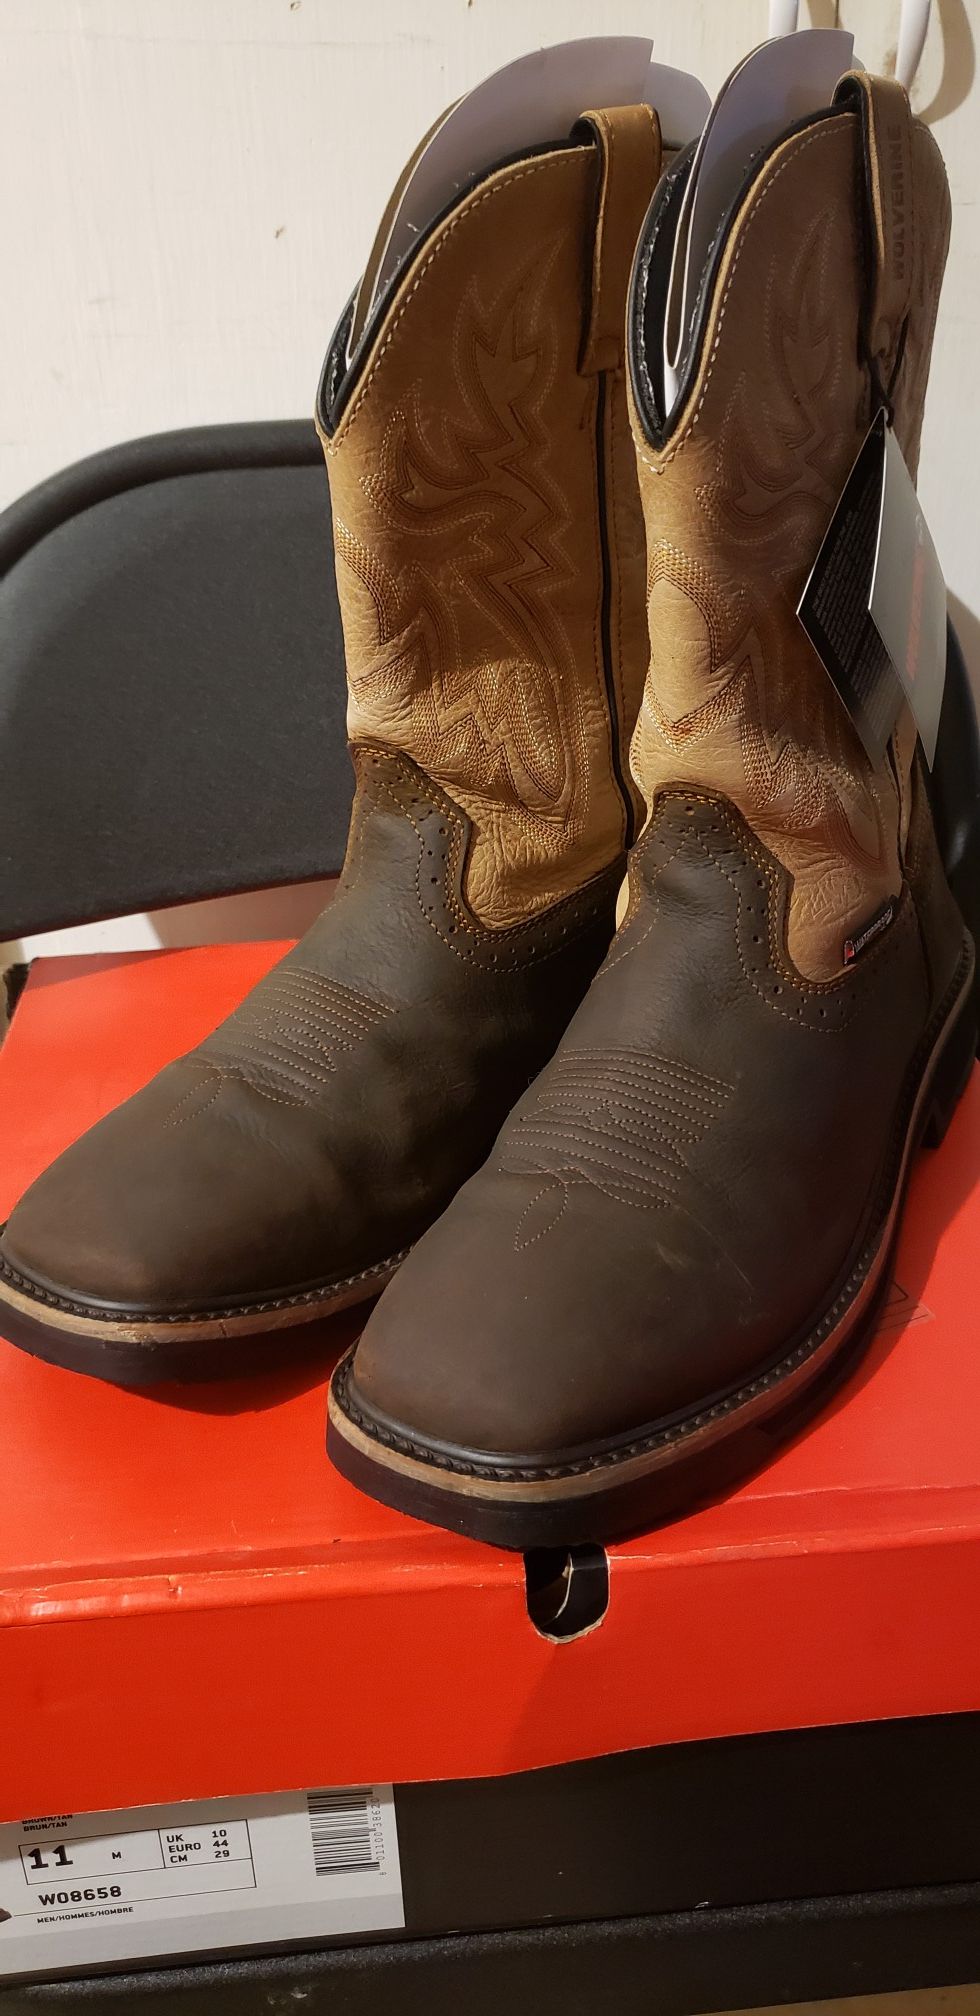 Wolverine square toe work boots